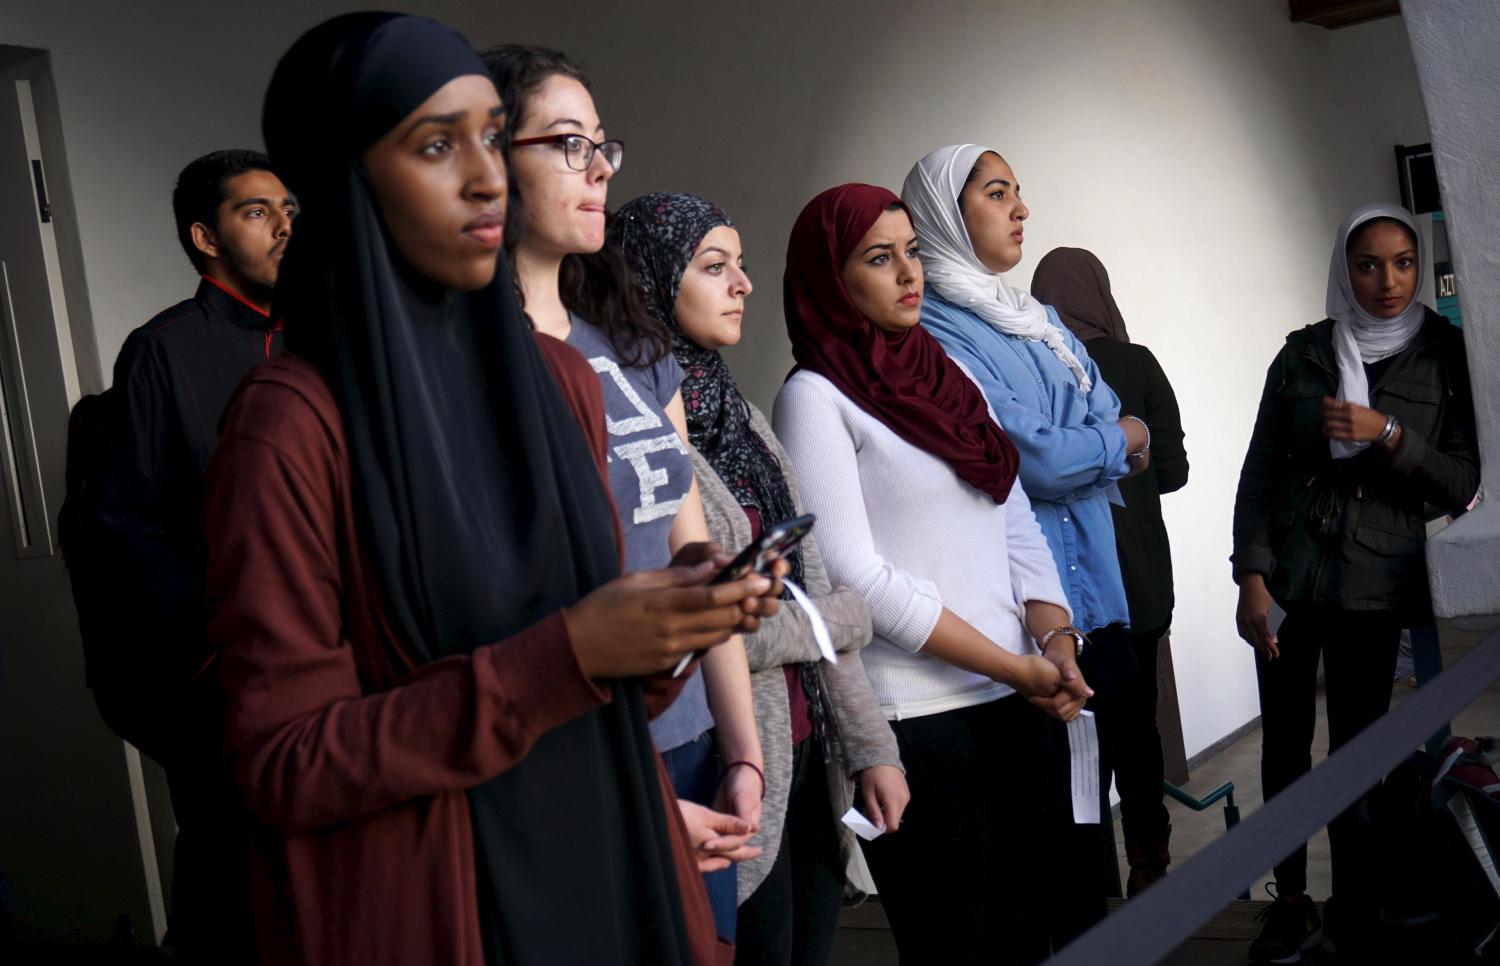 Students listen to speakers at a rally against Islamophobia at San Diego State University in San Diego, California, November 23, 2015. REUTERS/Sandy Huffaker - RTX1VIPI